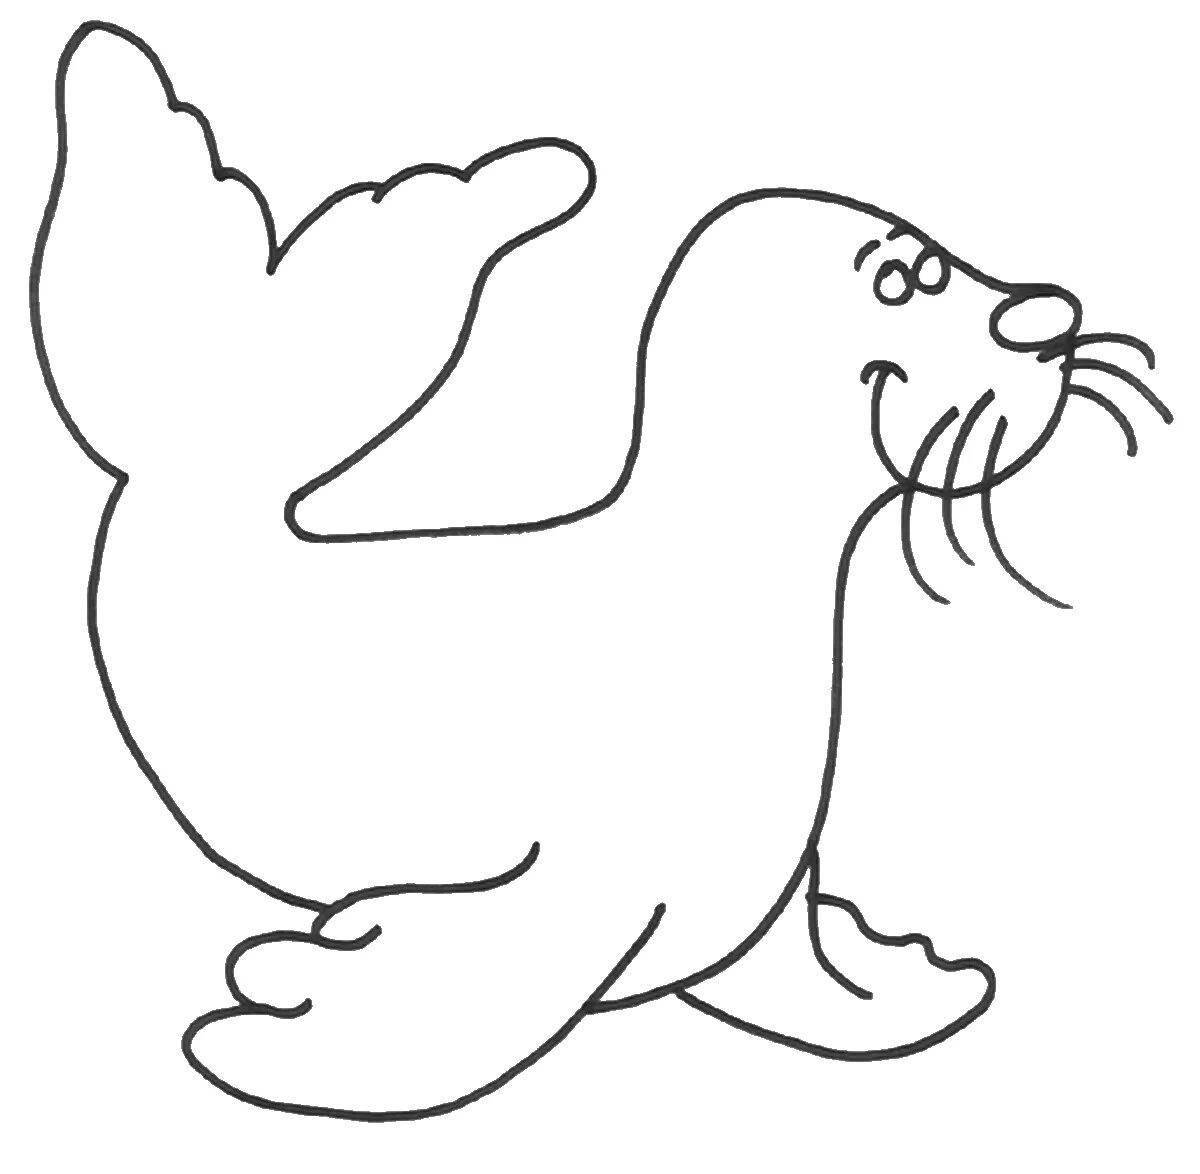 Amazing sea lion coloring page for kids